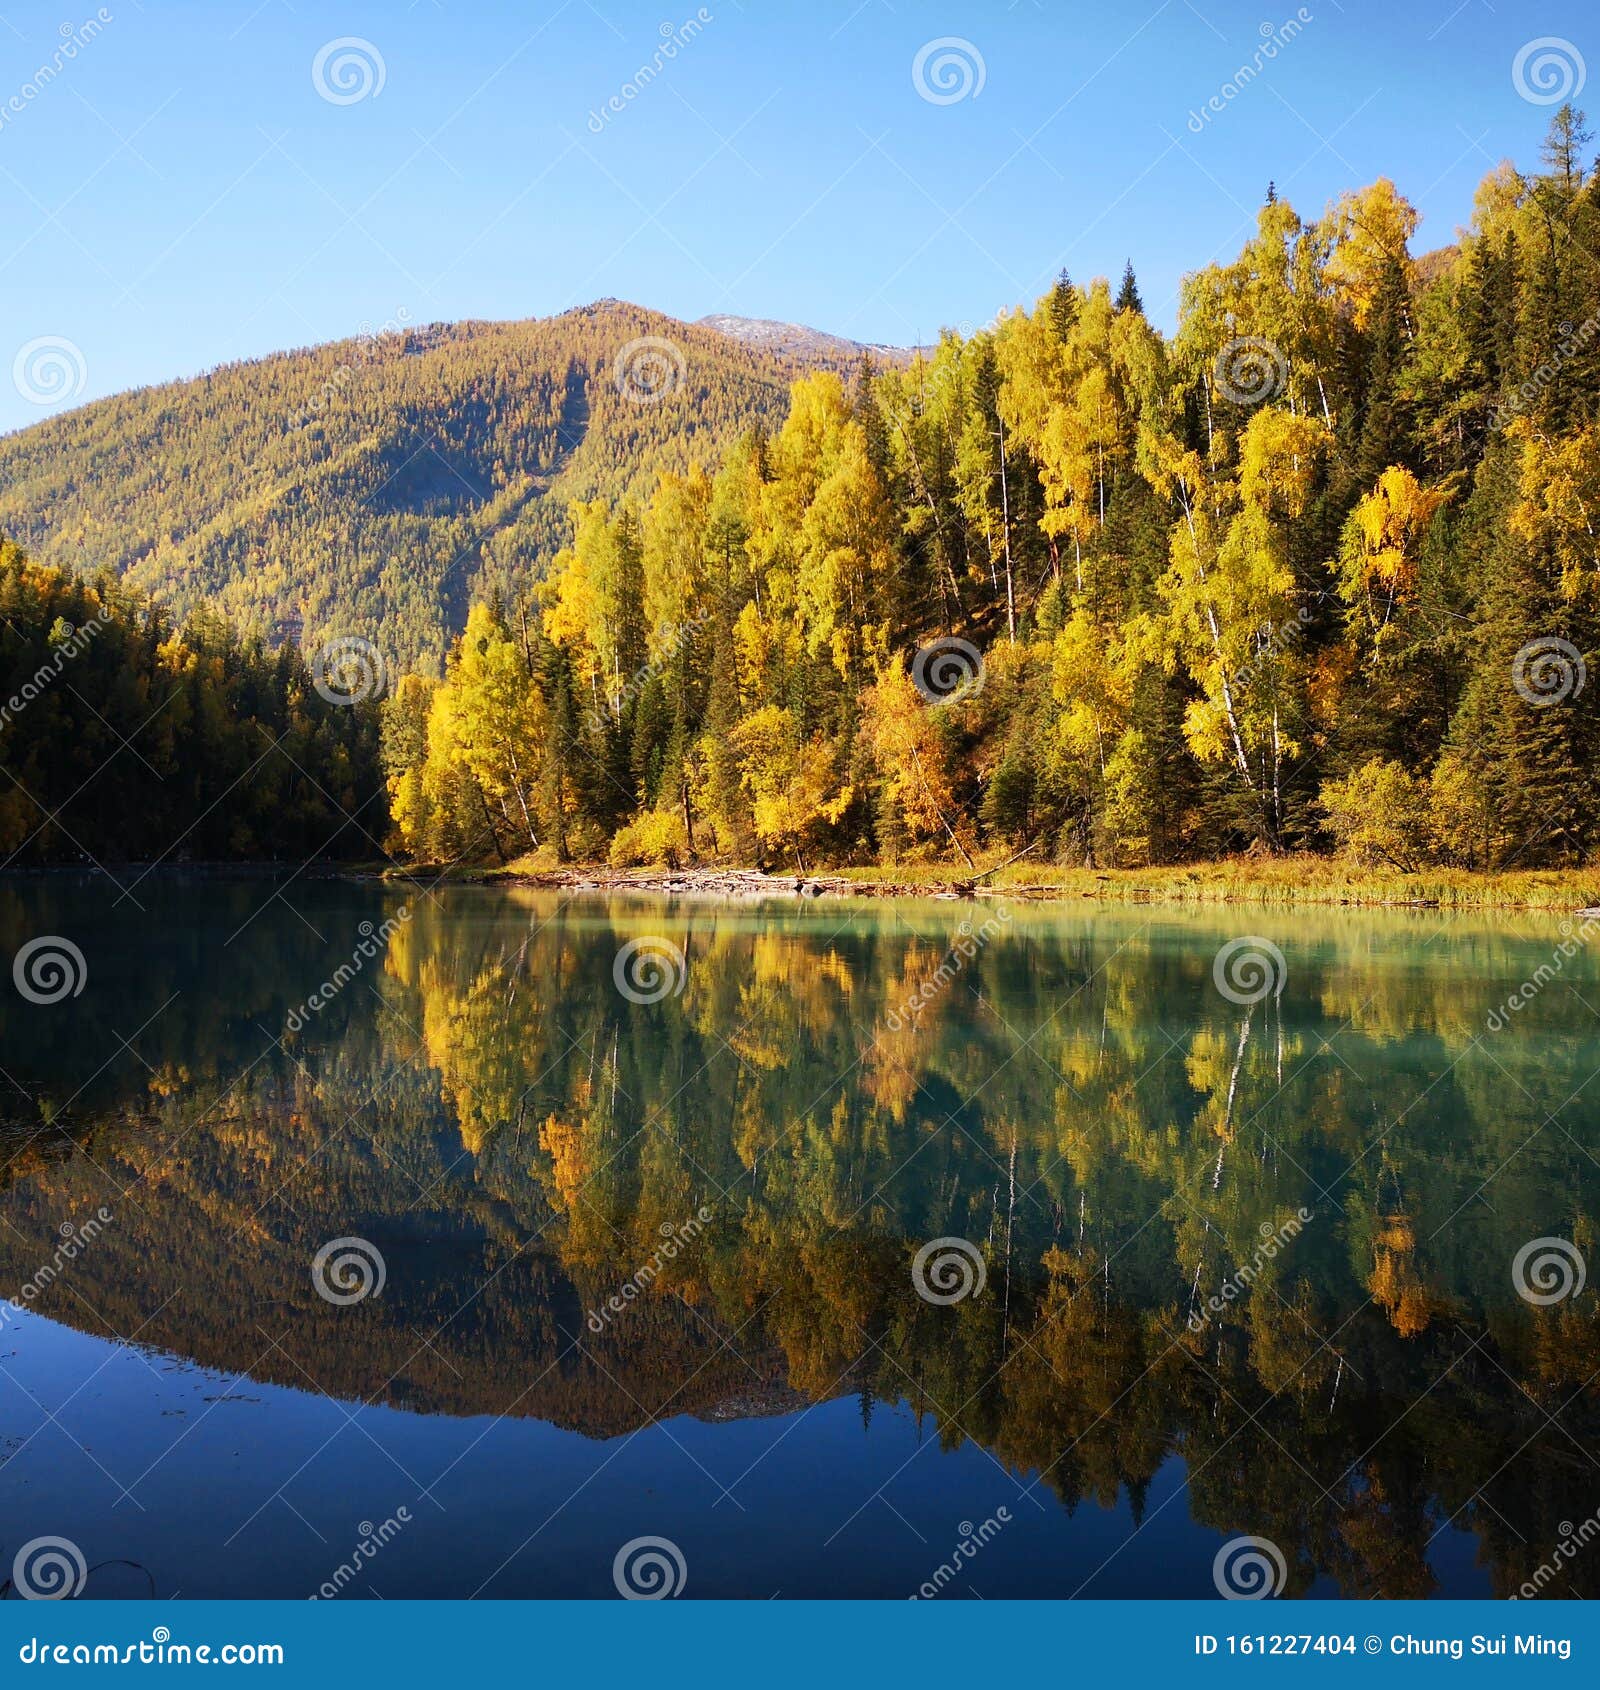 beautiful  autumn scenery with forest and reflection on the lake